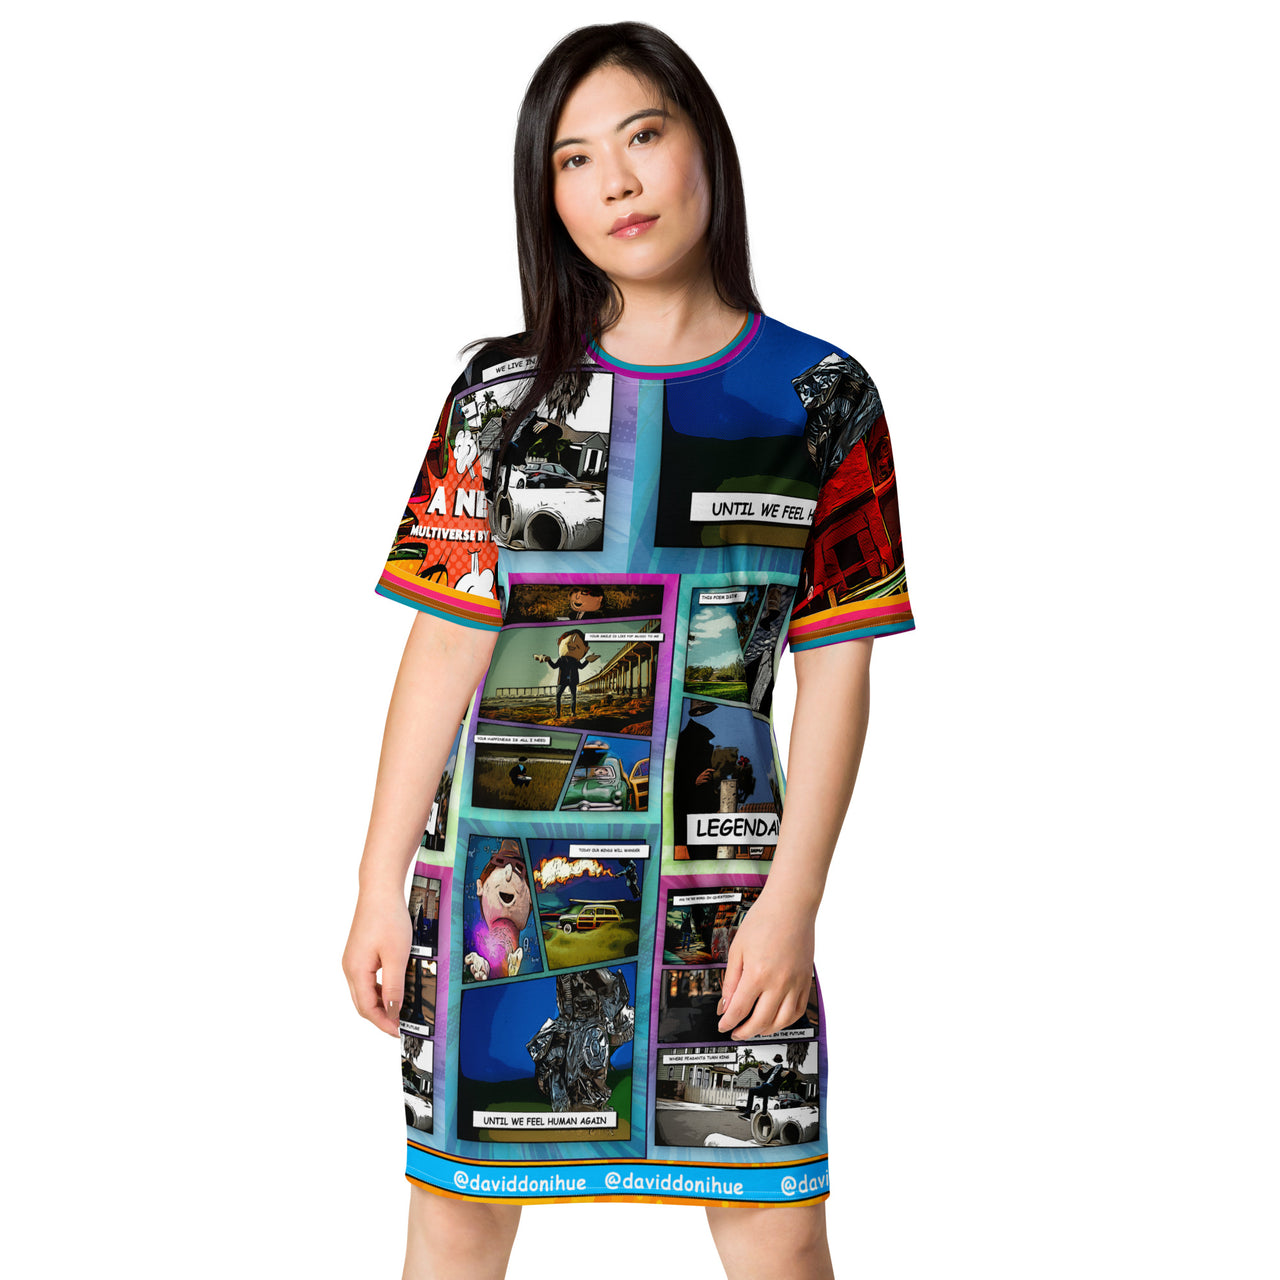 T-shirt dress of The Poetry Verse Multi-Verse Poems Series by David N Donihue